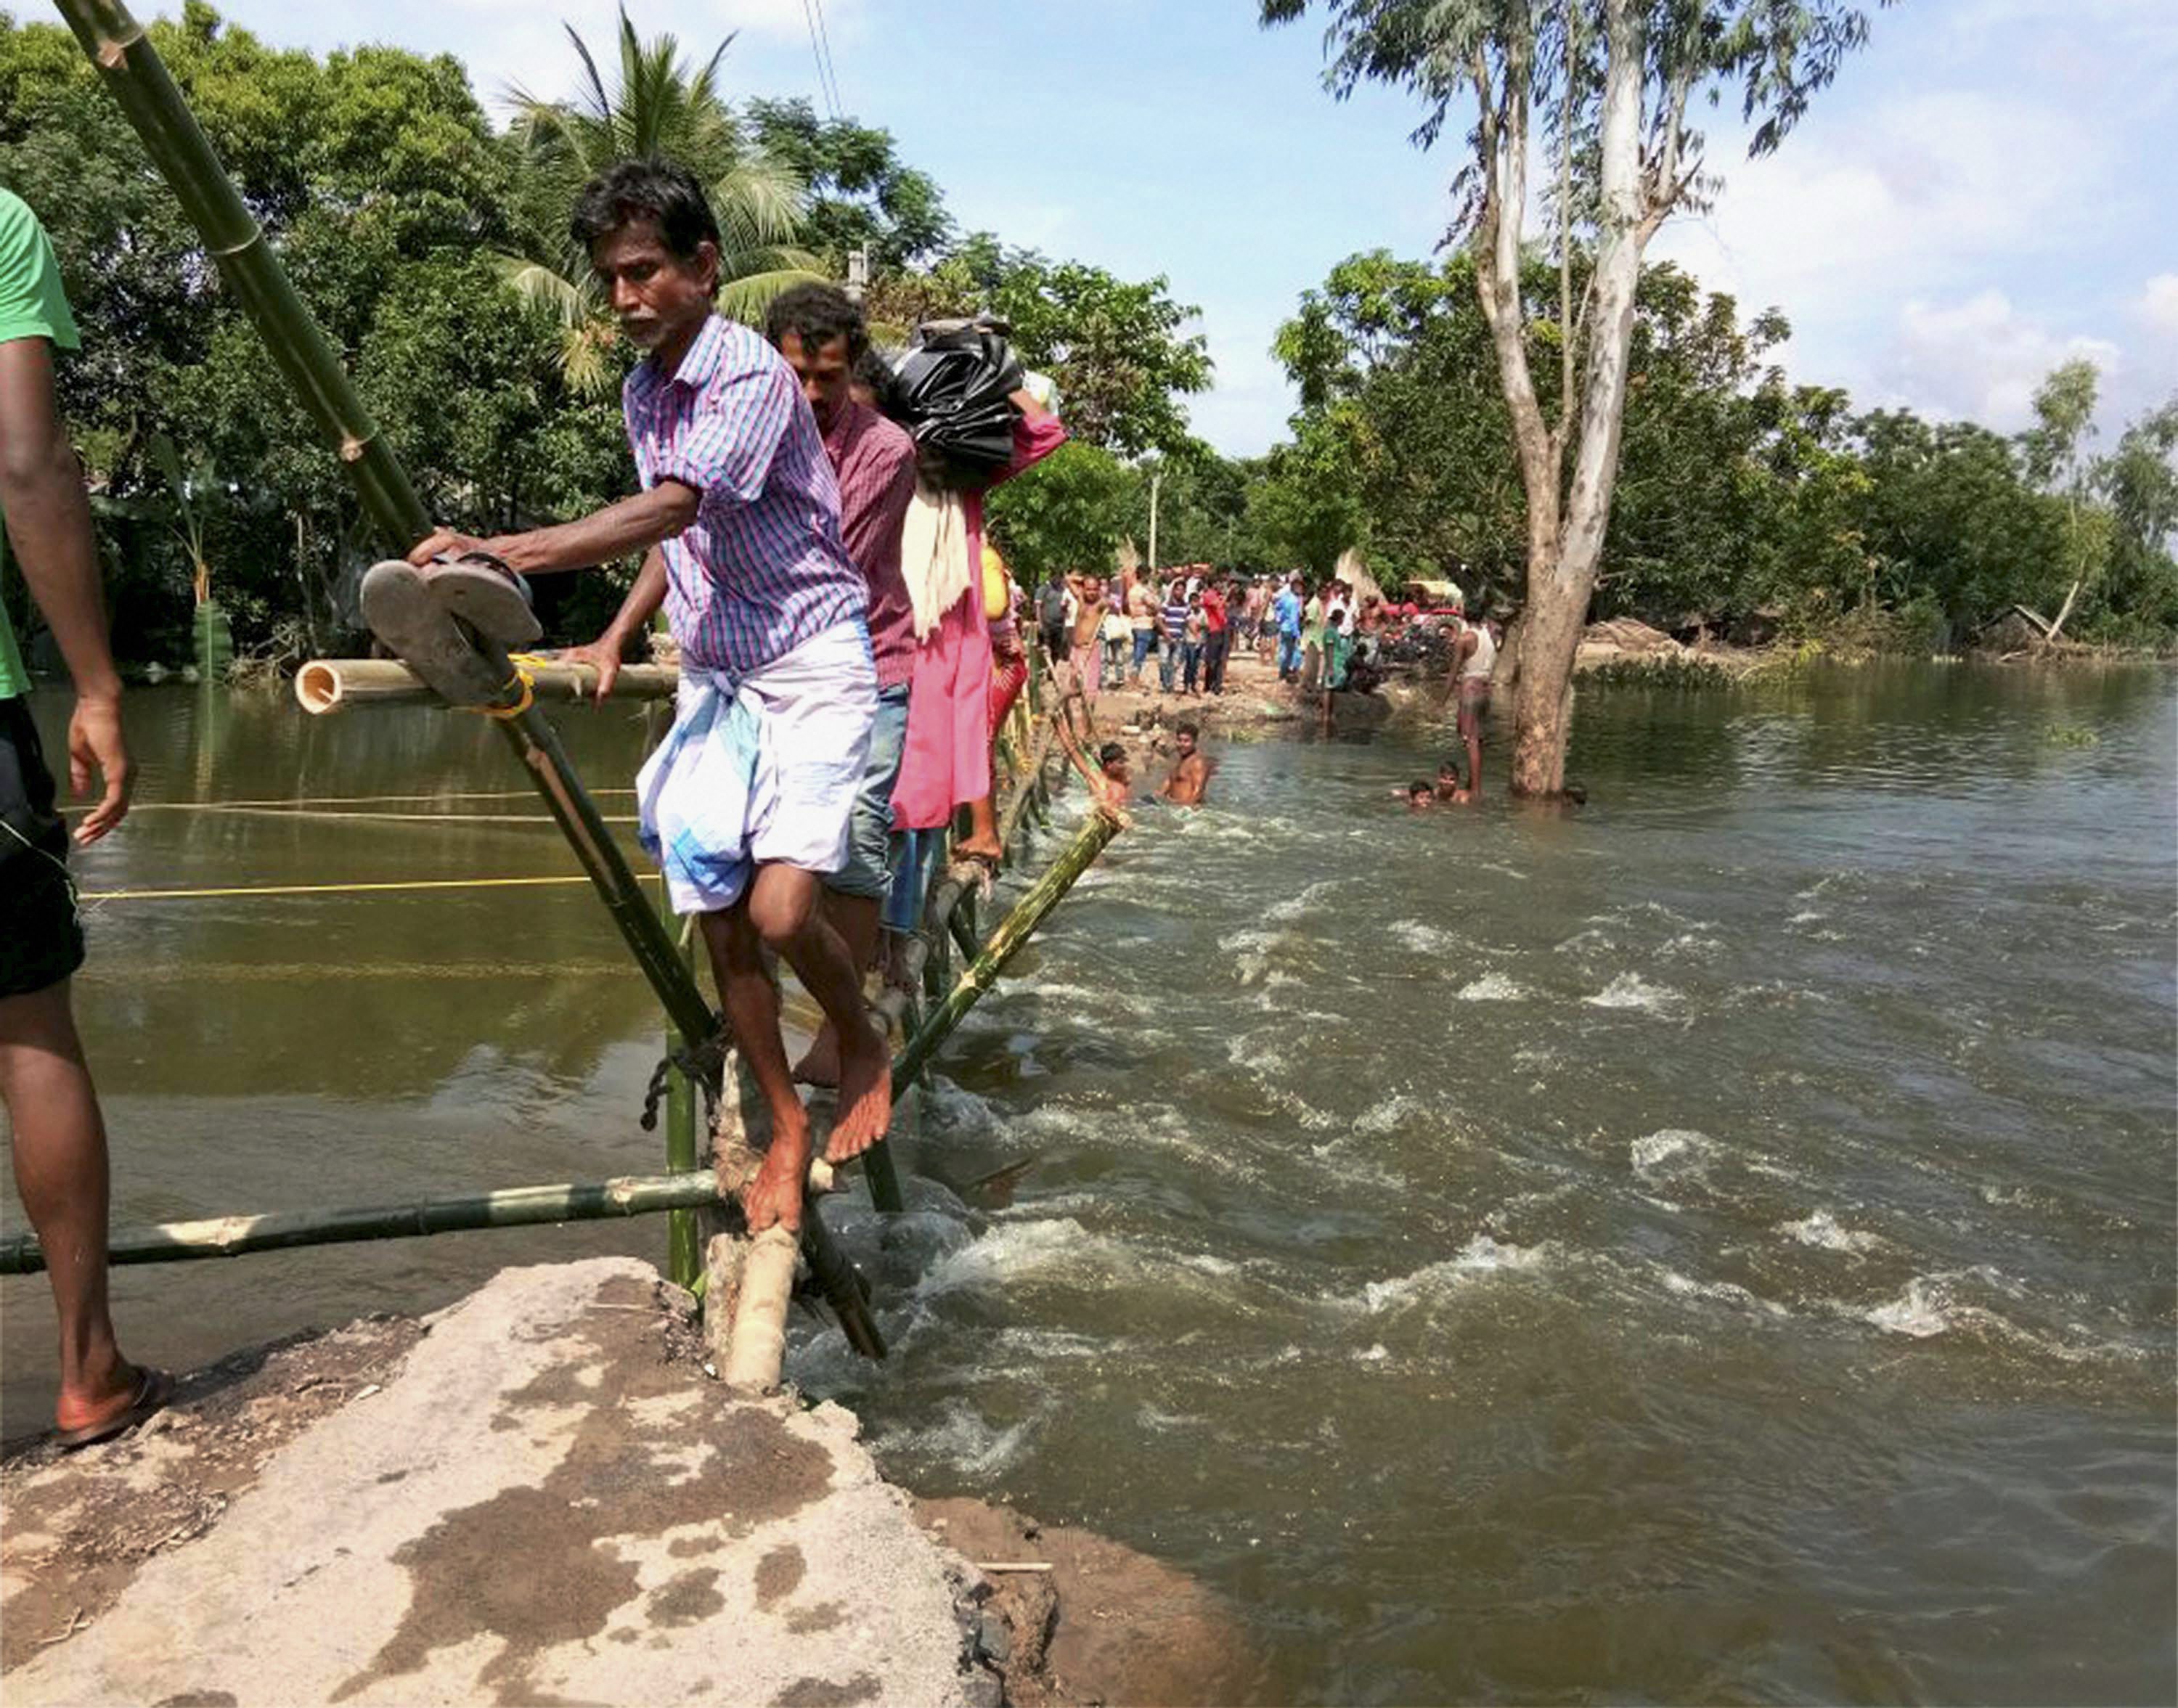 North Dinajpur: Villagers use a makeshift bamboo bridge to cross a flooded locality at Itahar village in North Dinajpur district of West Bengal on Sunday. PTI Photo (PTI8_21_2017_000113B)